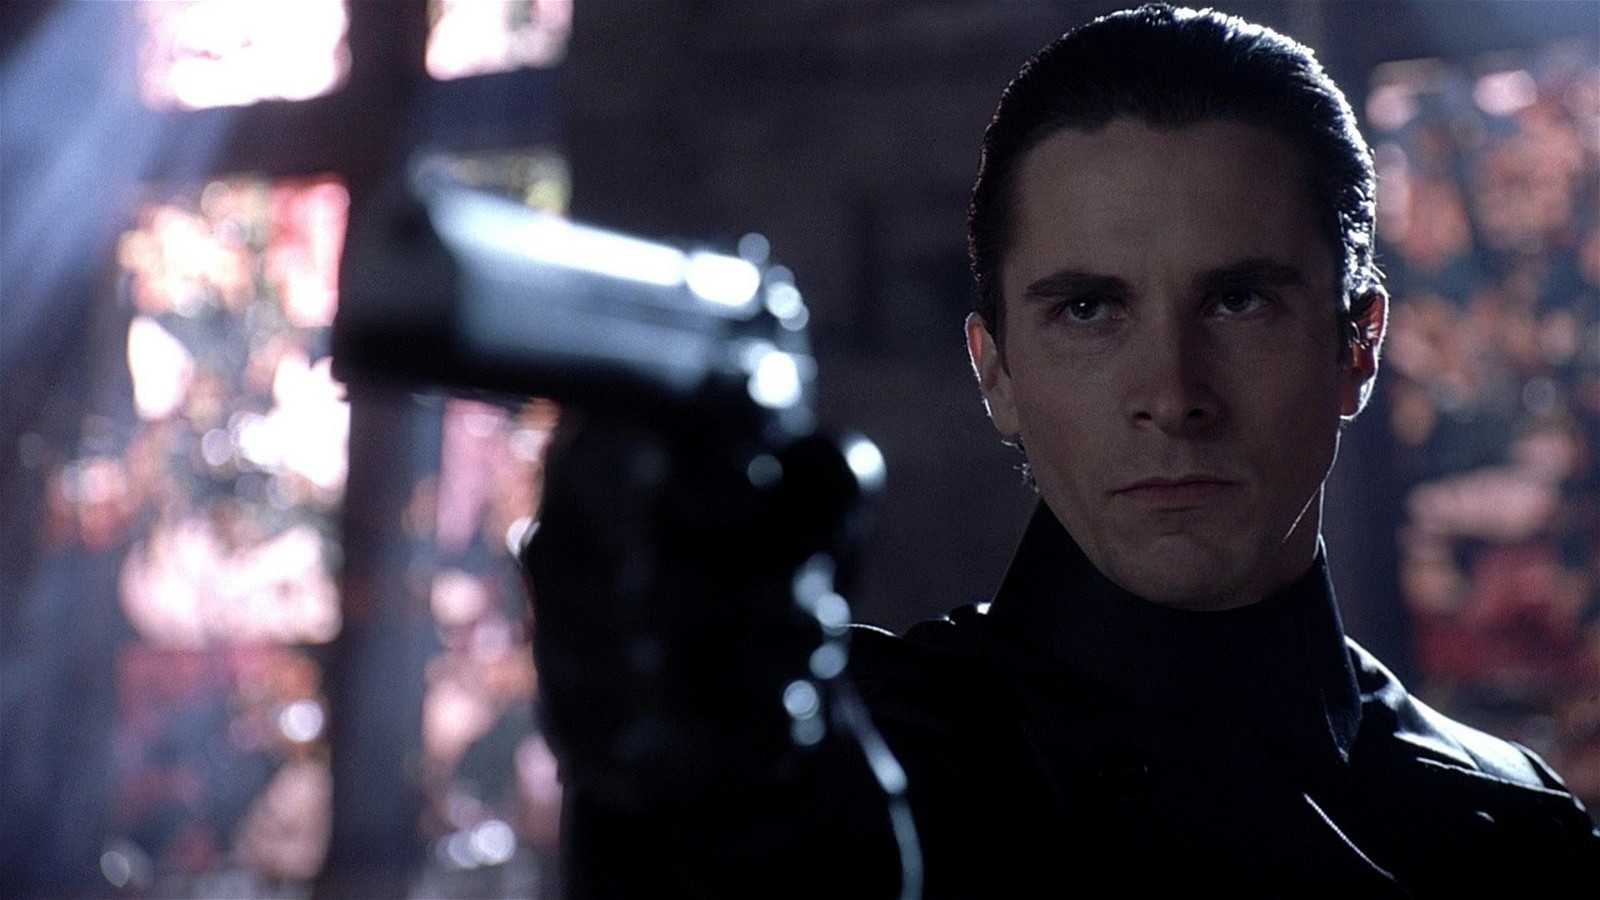 A 9mm pistol in Call of Duty: Modern Warfare 2 references Christian Bale's signature pose from Equilibrium.